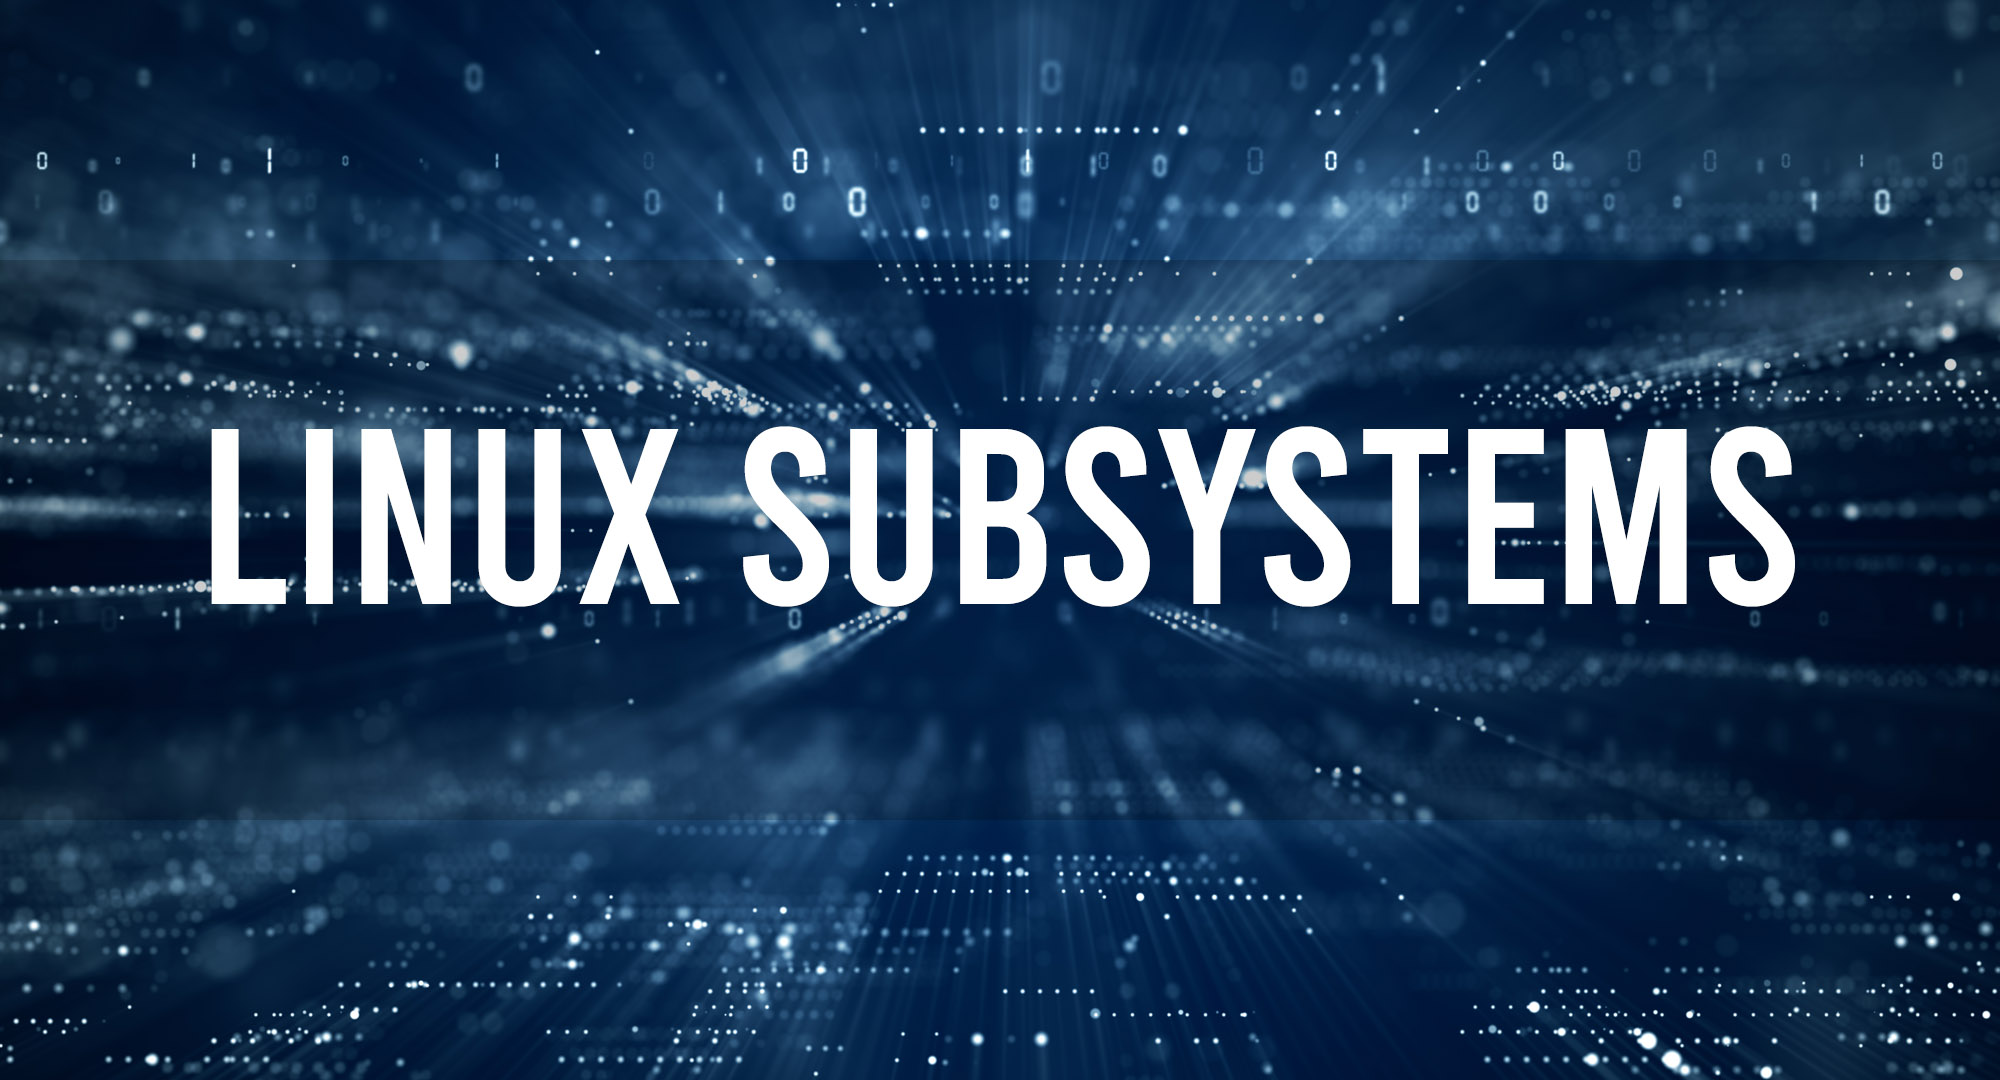 Linux Subsystem